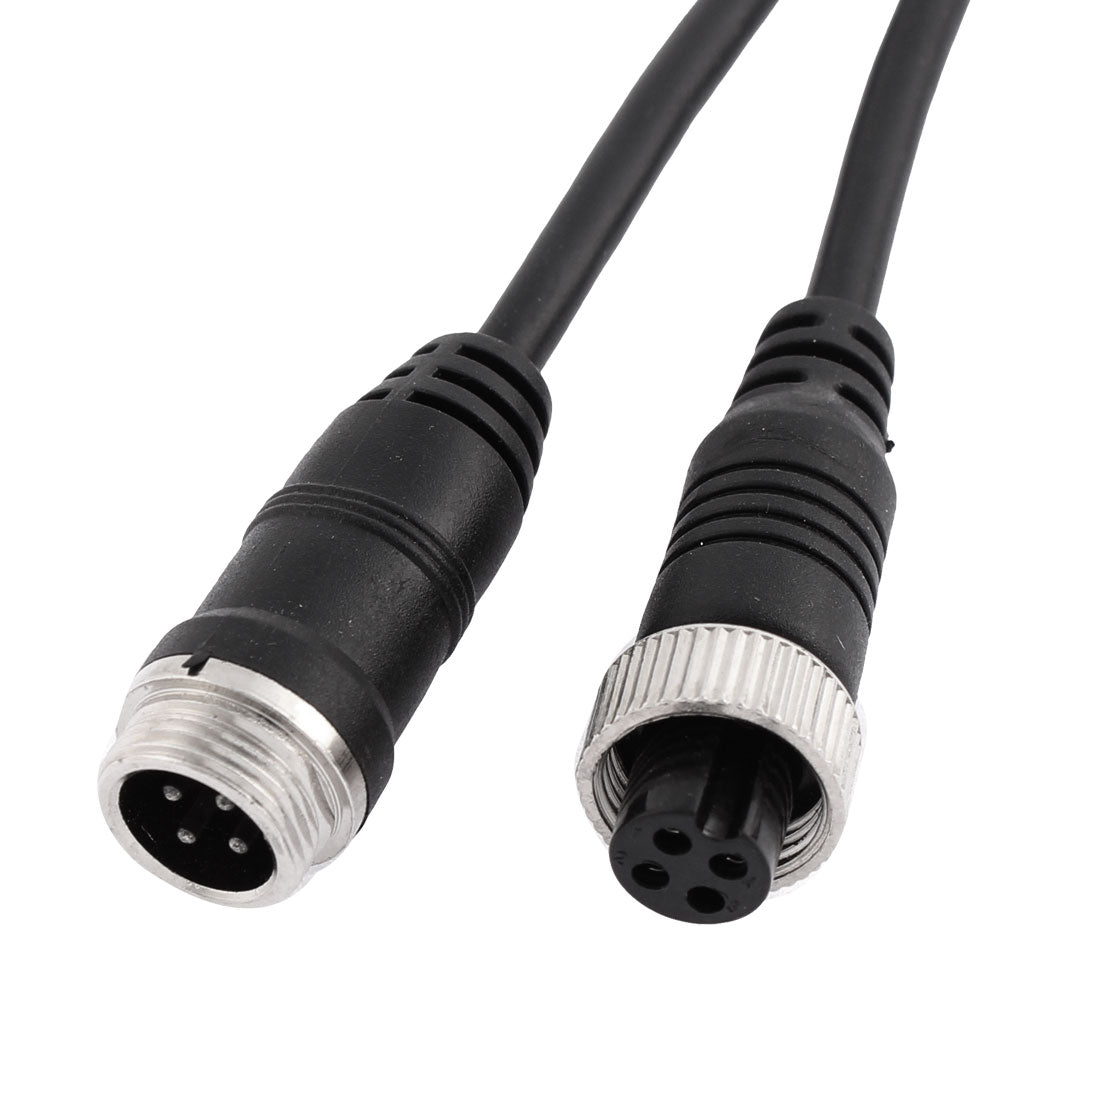 uxcell Uxcell Car Bus Monitor Camera Male to Female 4 Pin Video Power Extension Cable 3 Meters